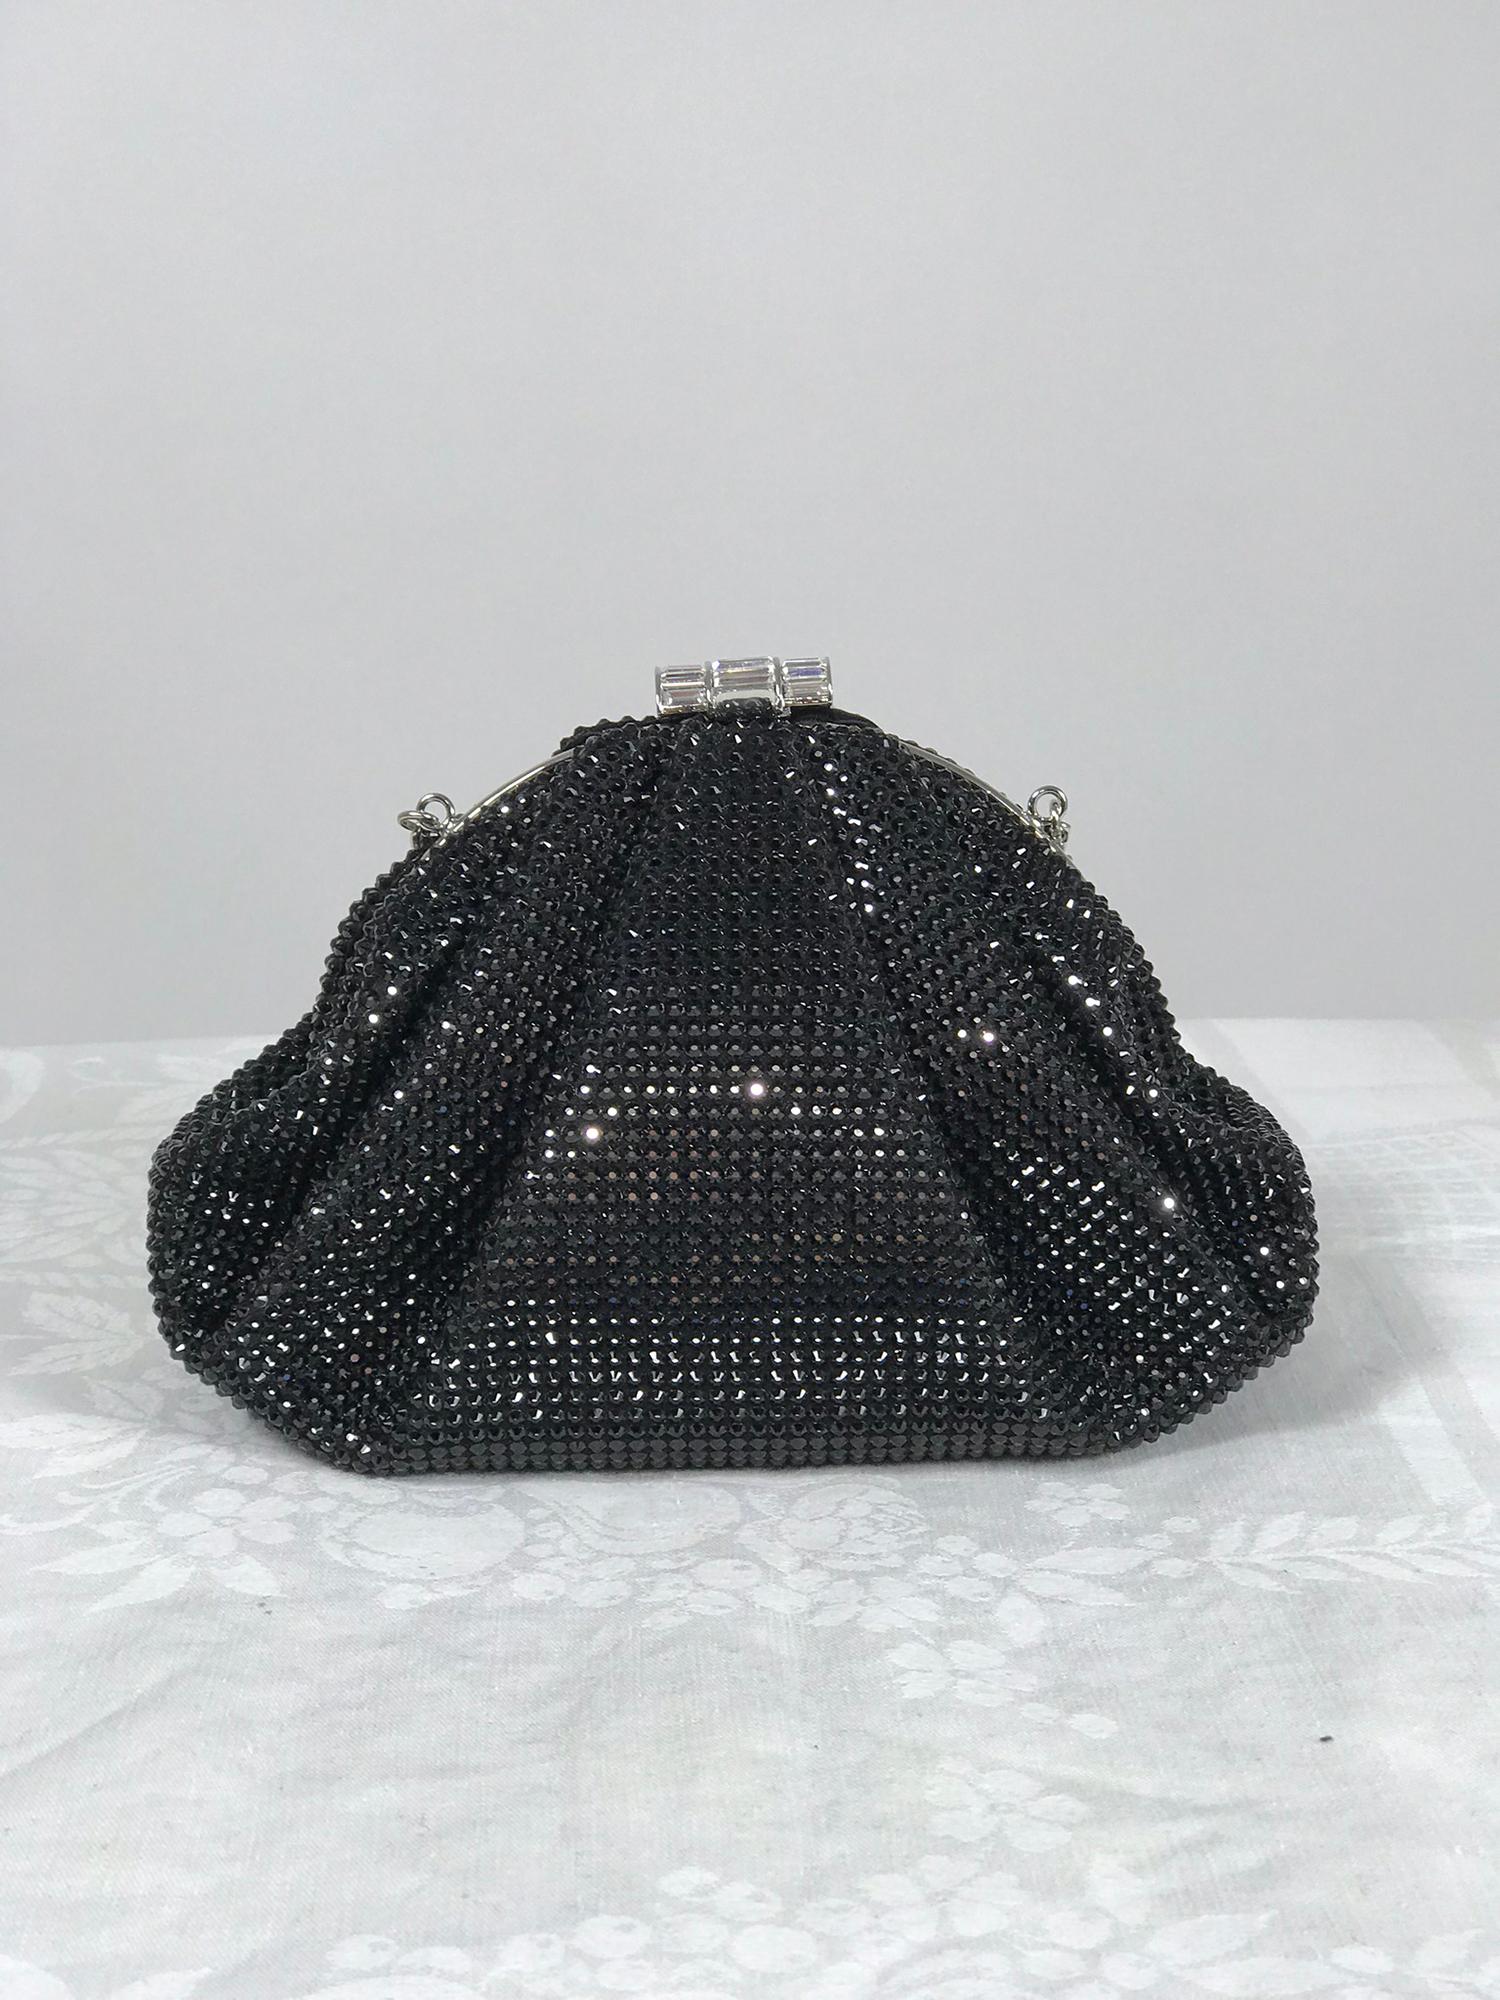 Judith Leiber Couture black rhinestone, crystal rhinestone and silver metal chain handle, silver metal frame evening bag from 2016, original price $3495. This bag is barely, if ever used. Comes with the box and protector bag. The bag is pleated with